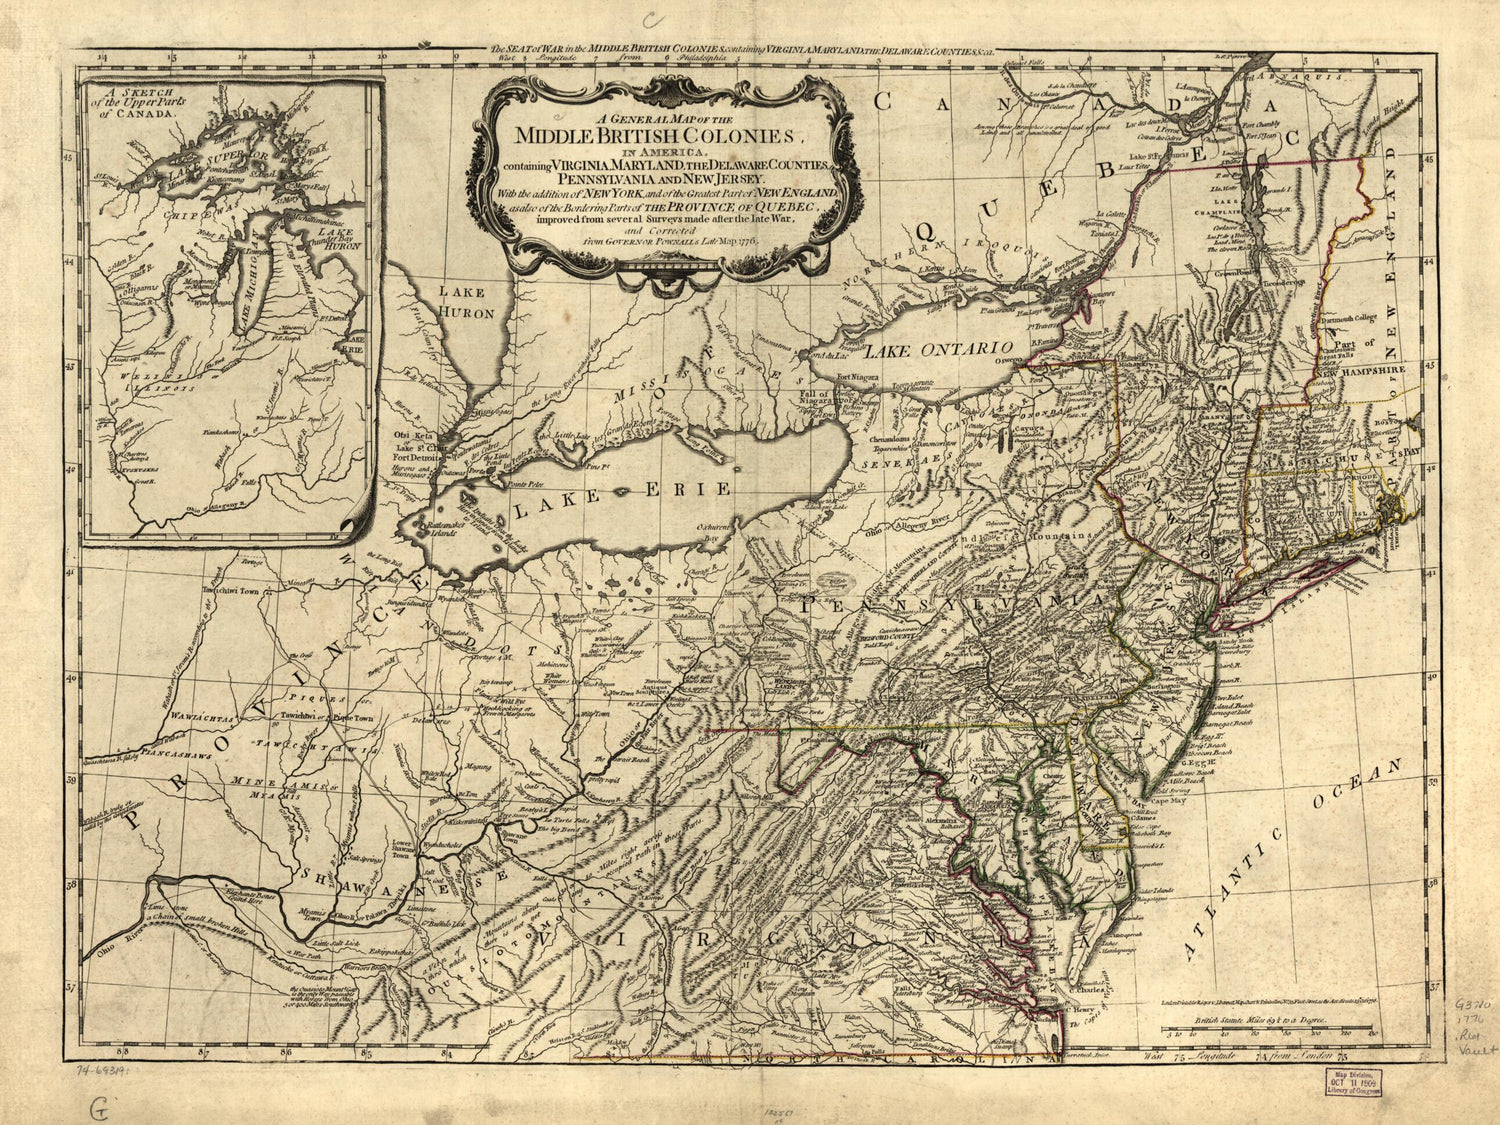 This old map of A General Map of the Middle British Colonies, In America. Containing Virginia, Maryland, the Delaware Counties, Pennsylvania, and New Jersey. With the Addition of New York, and of the Greatest Part of New England, As Also of the Bordering